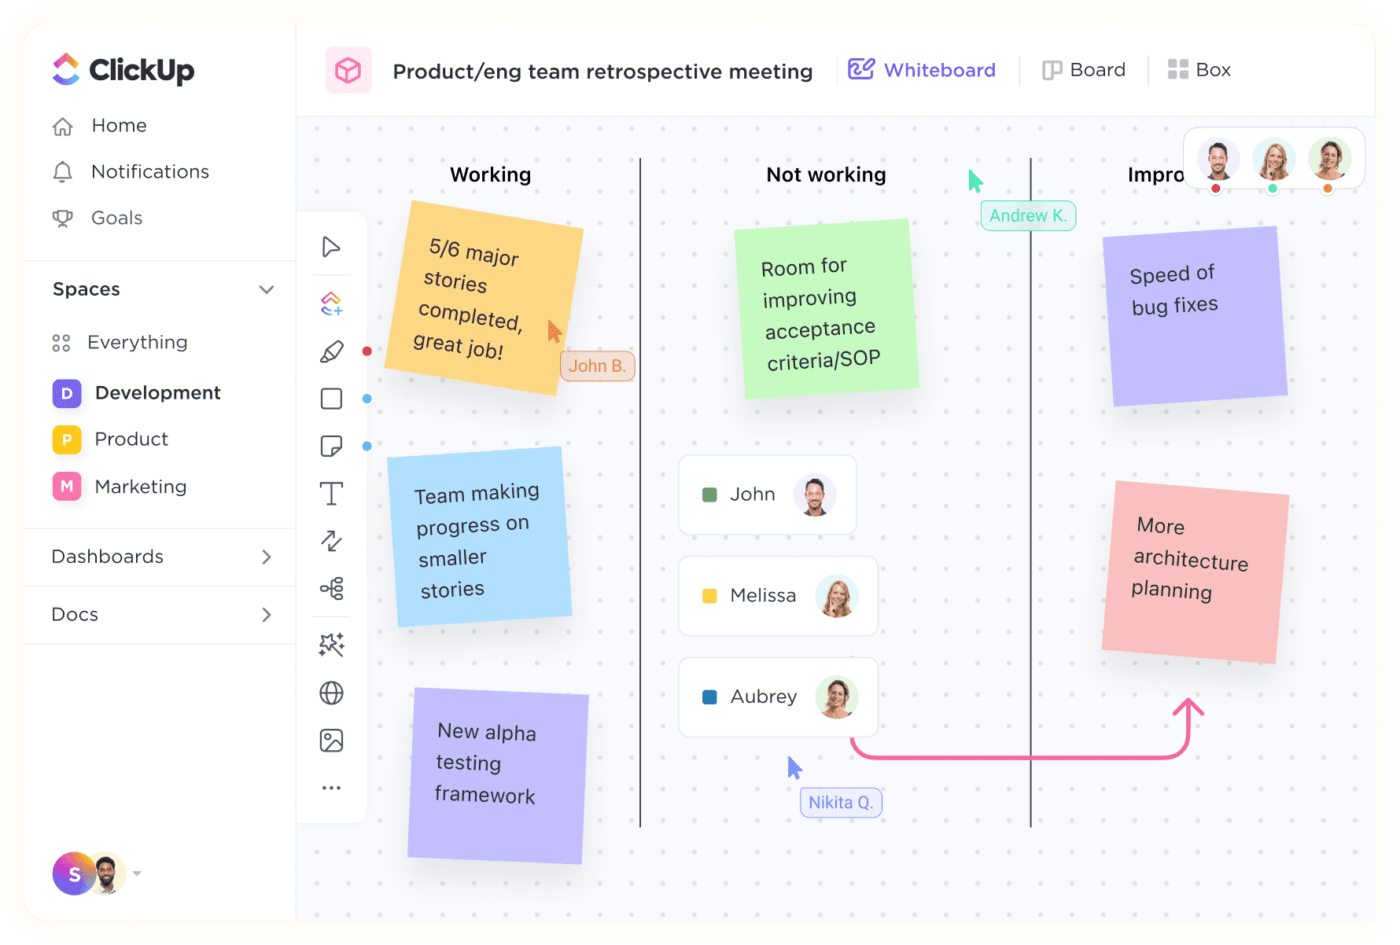 Streamline communication and ship projects faster with ClickUp Whiteboards. Brainstorm, plan, strategize, and communicate with your team in real-time